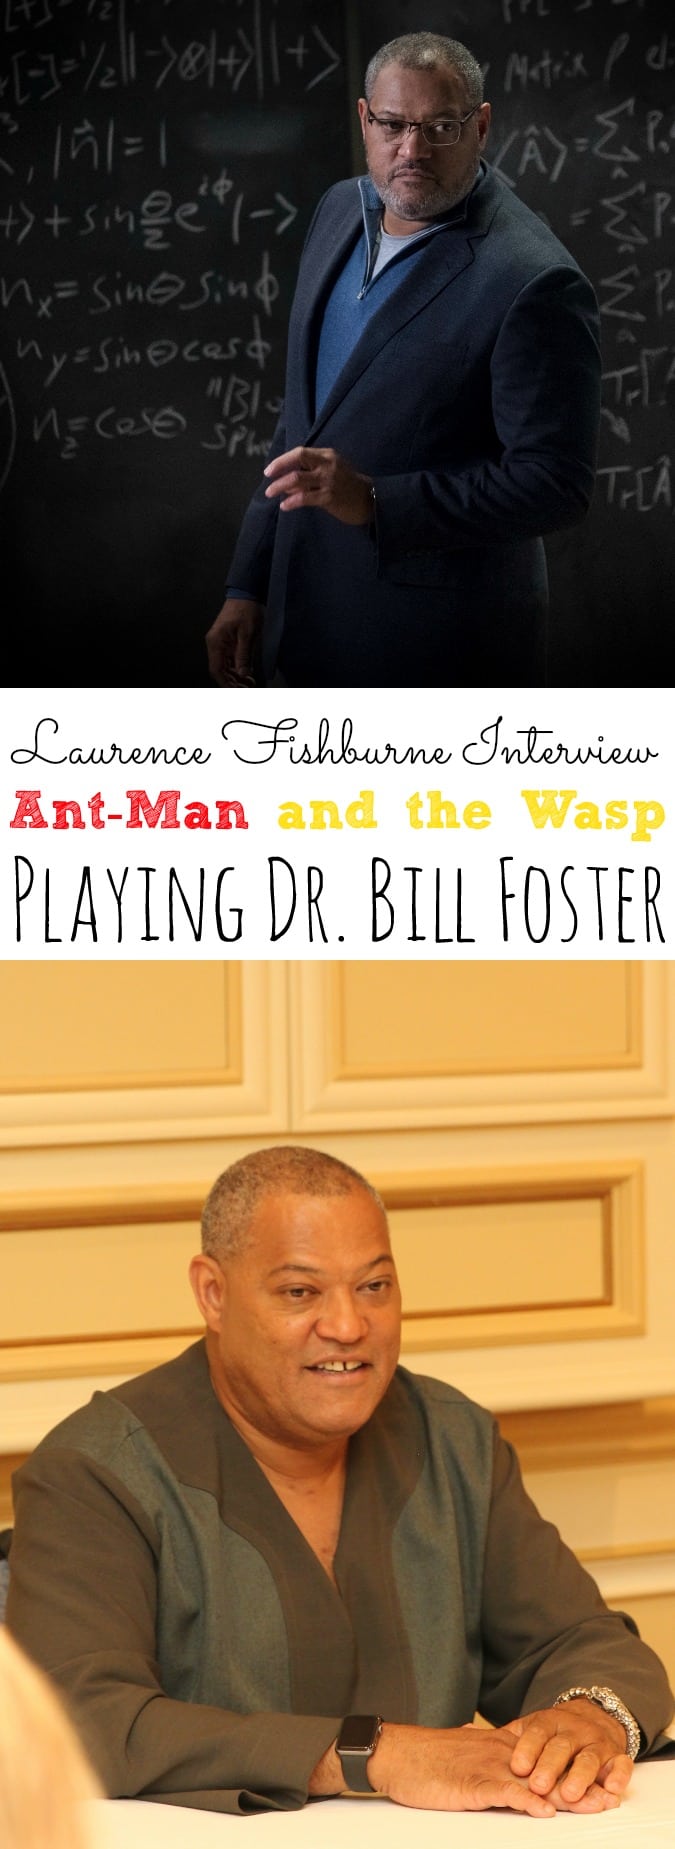 Laurence Fishburne Interview Ant-Man and the Wasp | Dr. Bill Foster - simplytodaylife.com